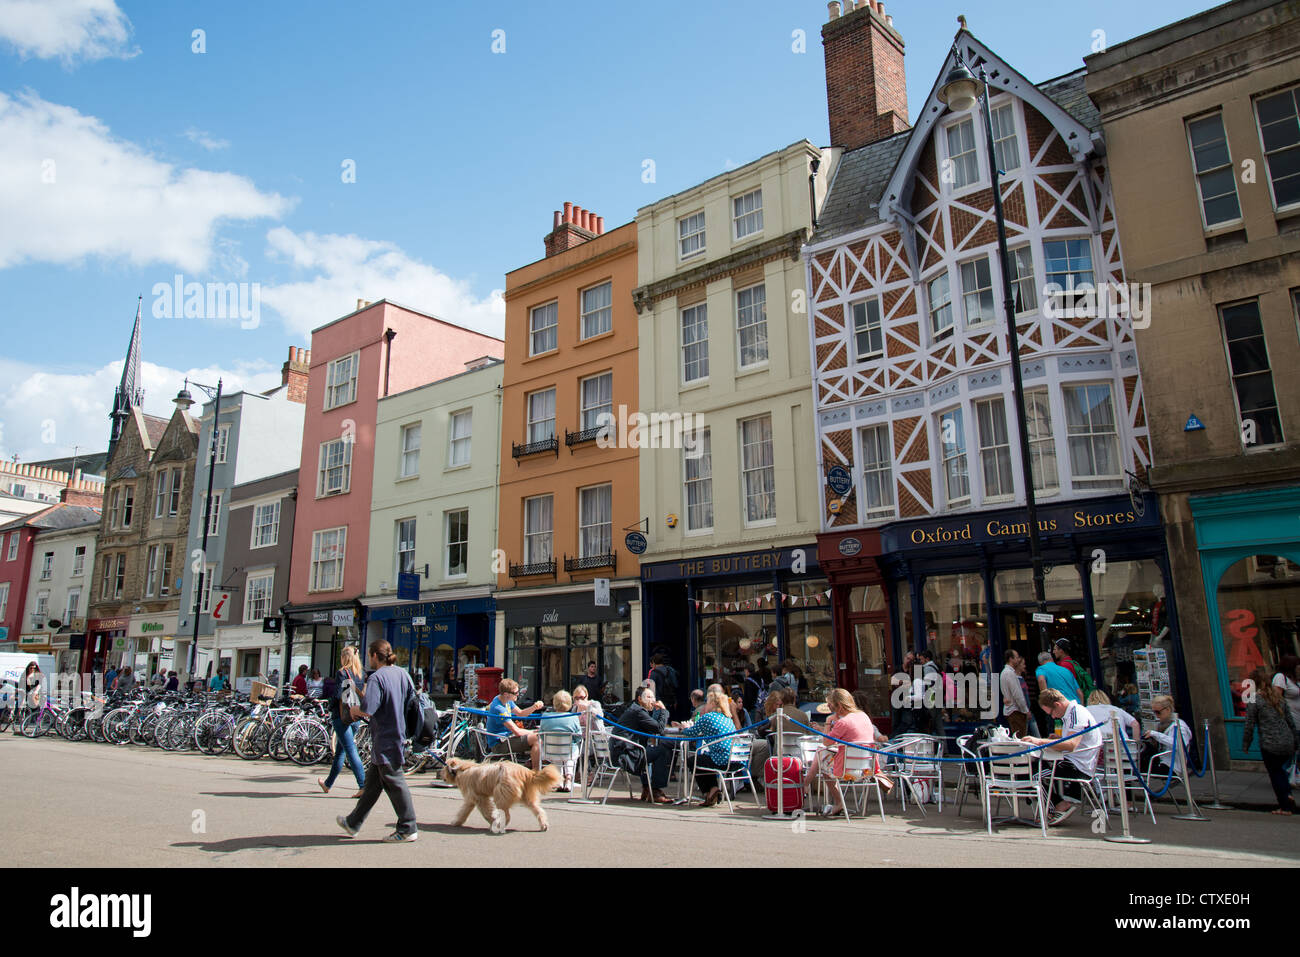 Outdoor cafe on Broad Street, Oxford, Oxfordshire, England, United Kingdom Stock Photo